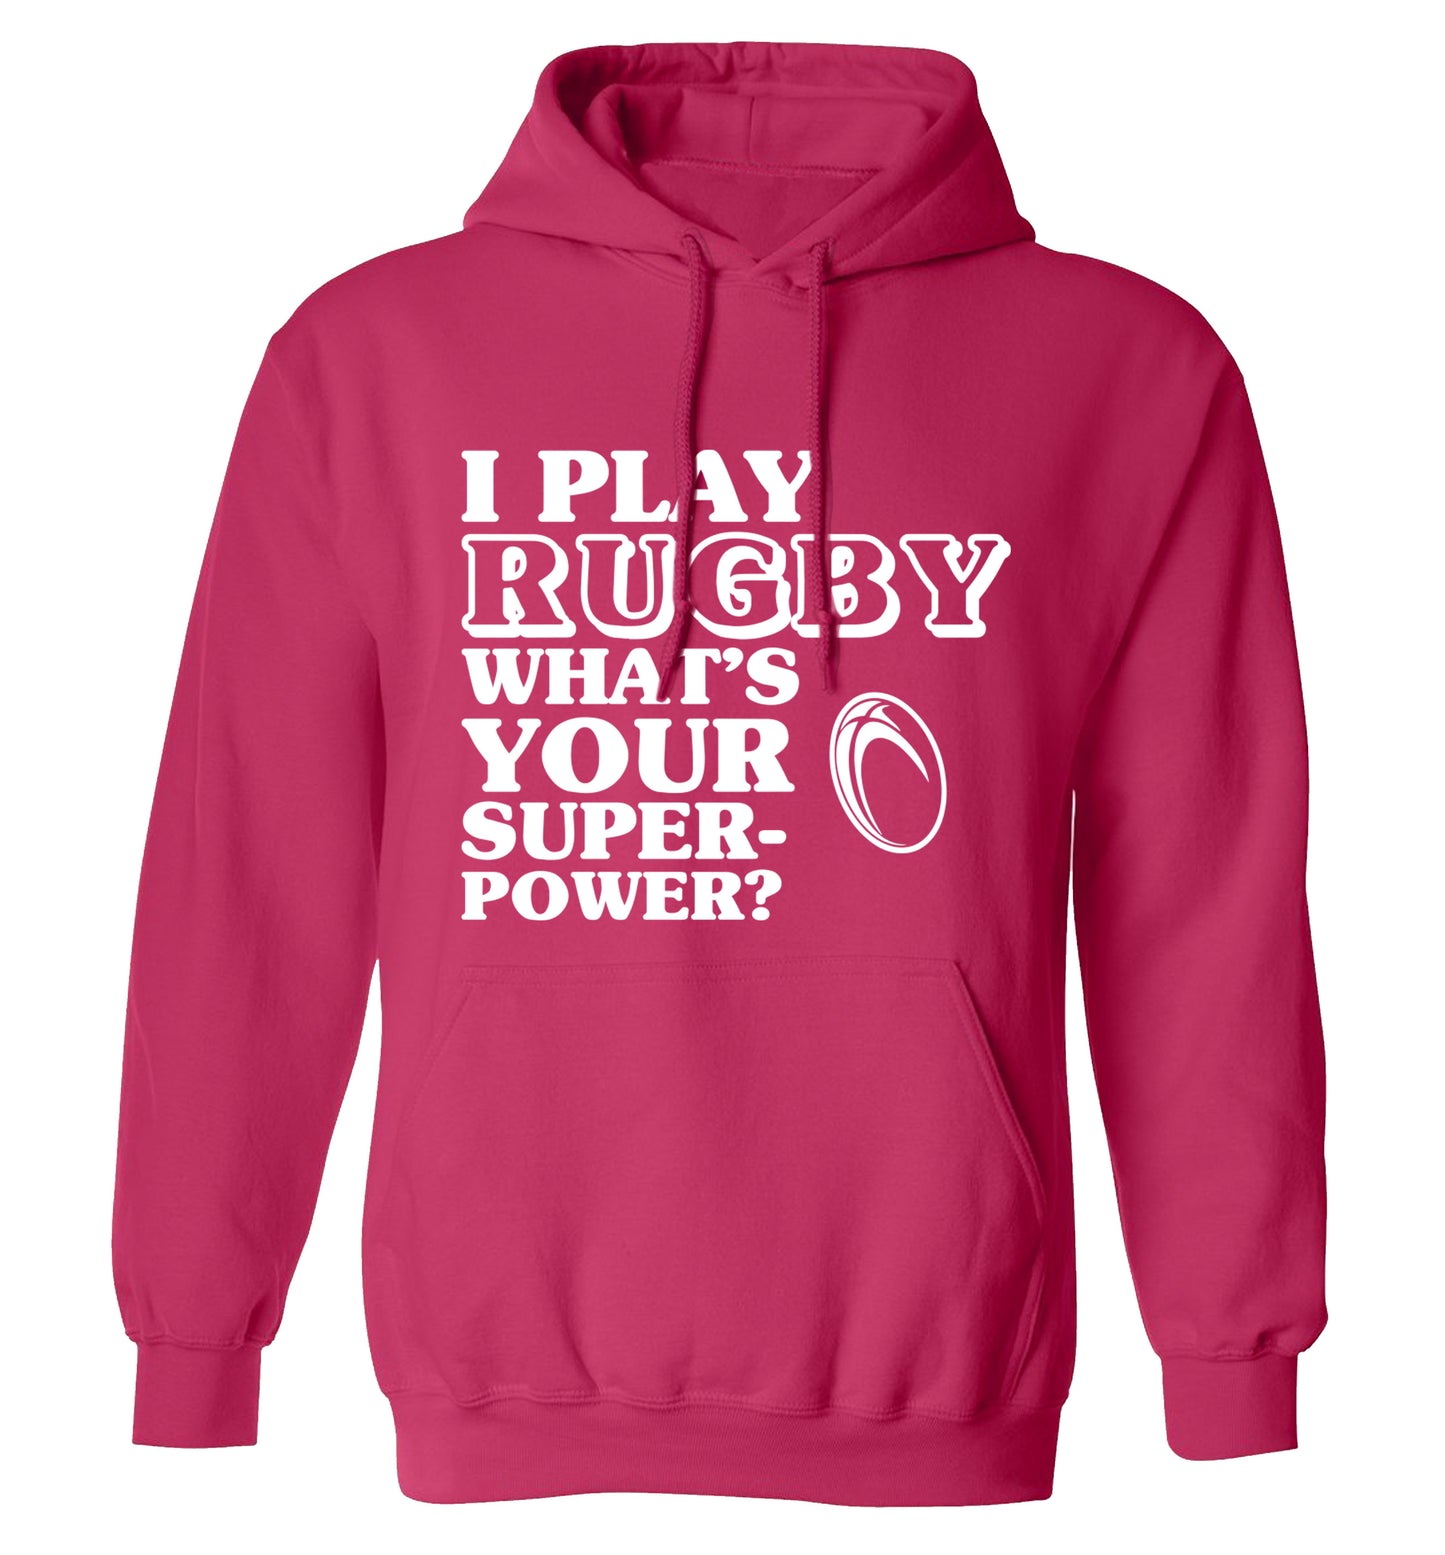 I play rugby what's your superpower? adults unisex pink hoodie 2XL